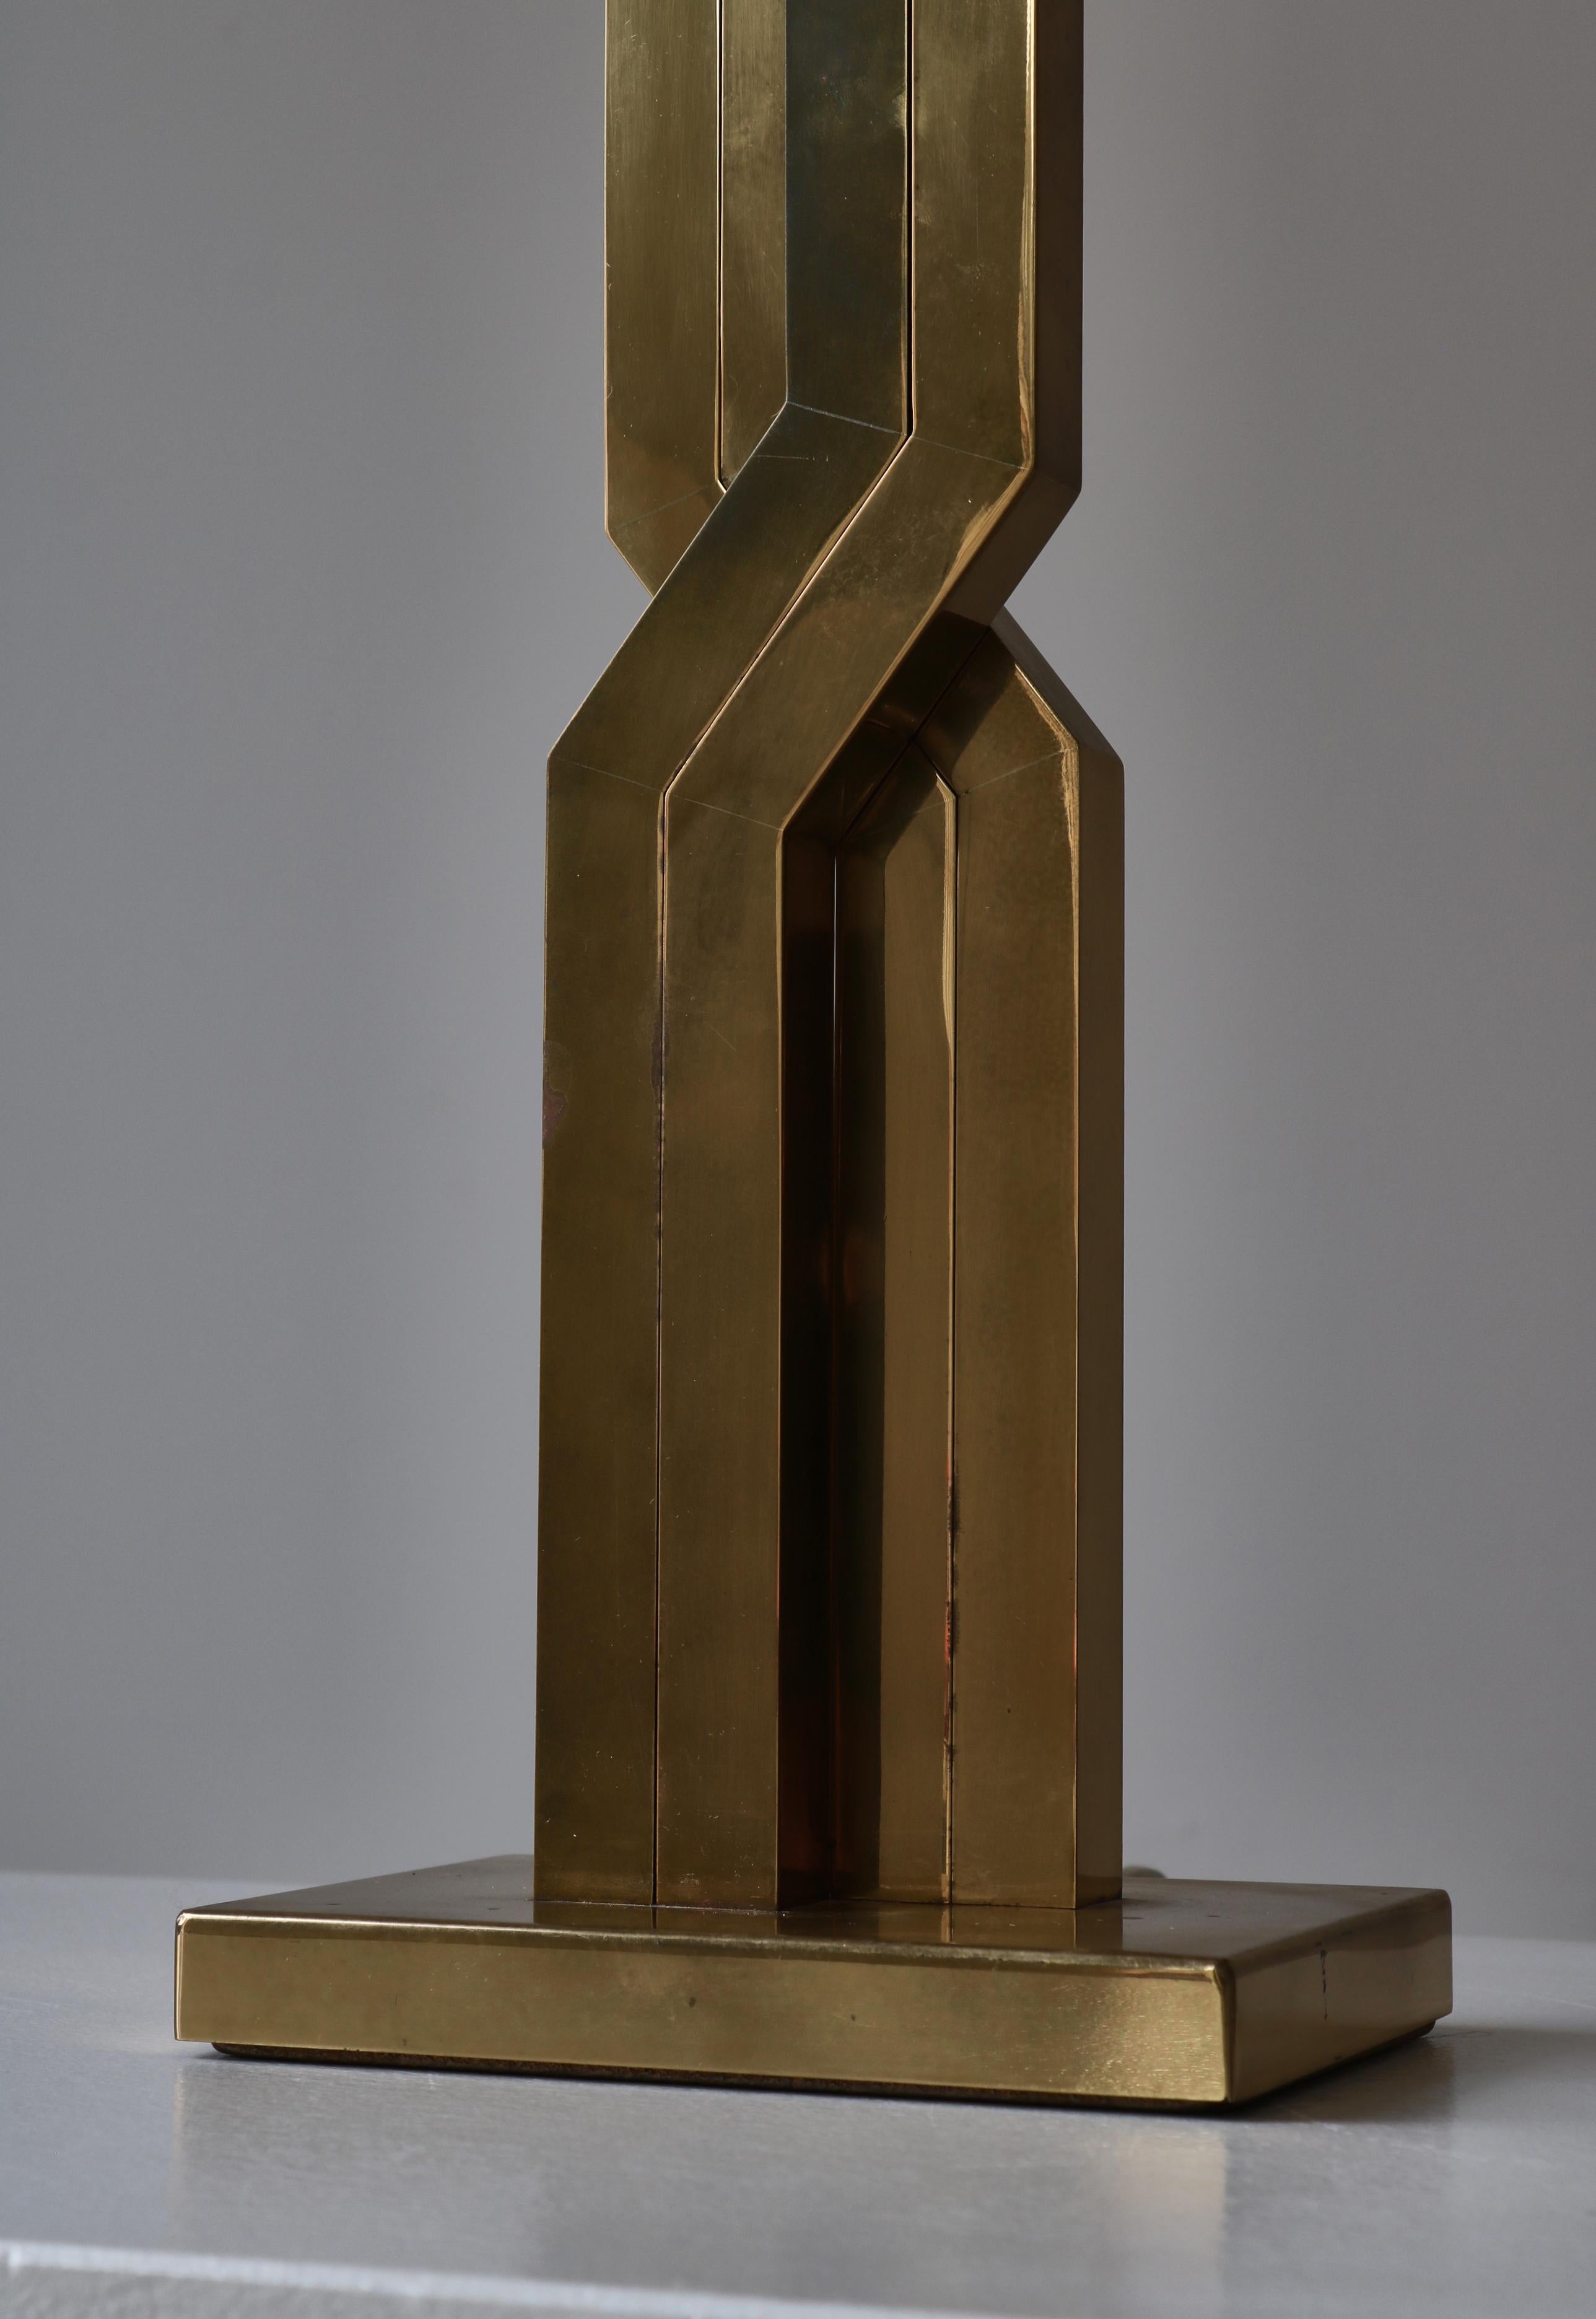 Large Danish Modern Table Lamps in Brass by Svend Aage Holm-Sørensen, 1960s For Sale 5